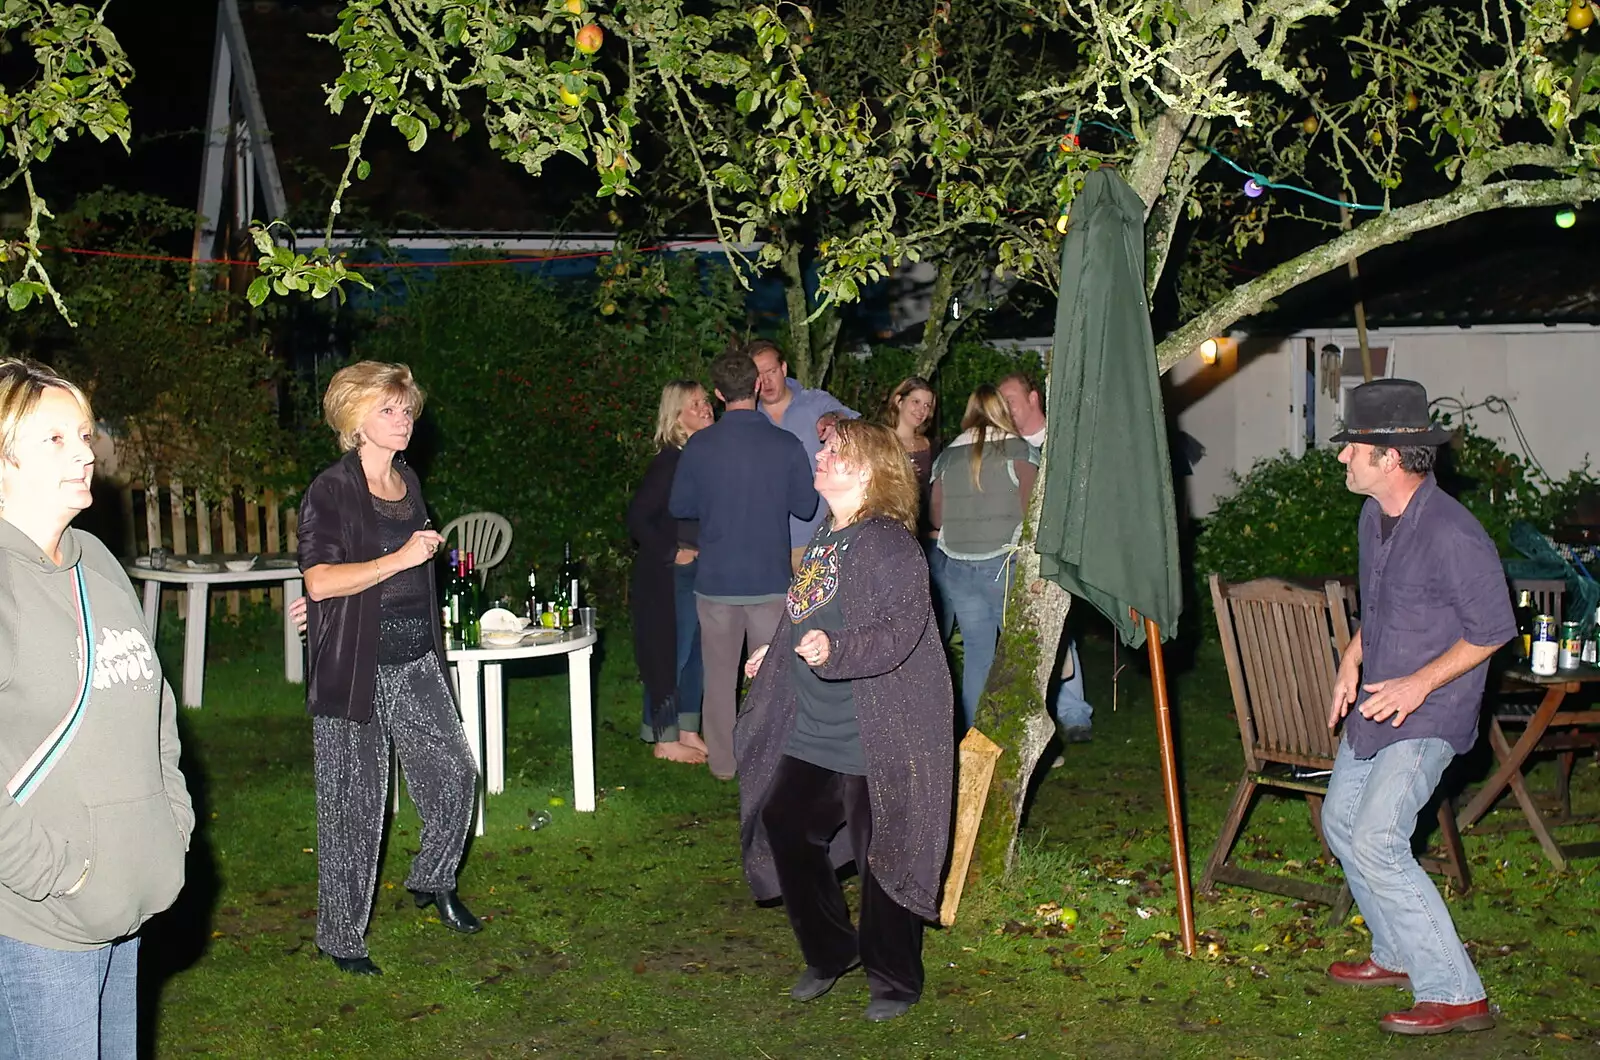 Dancing under a tree, from Jo and Steph's Party, Burston, Norfolk - 30th September 2005